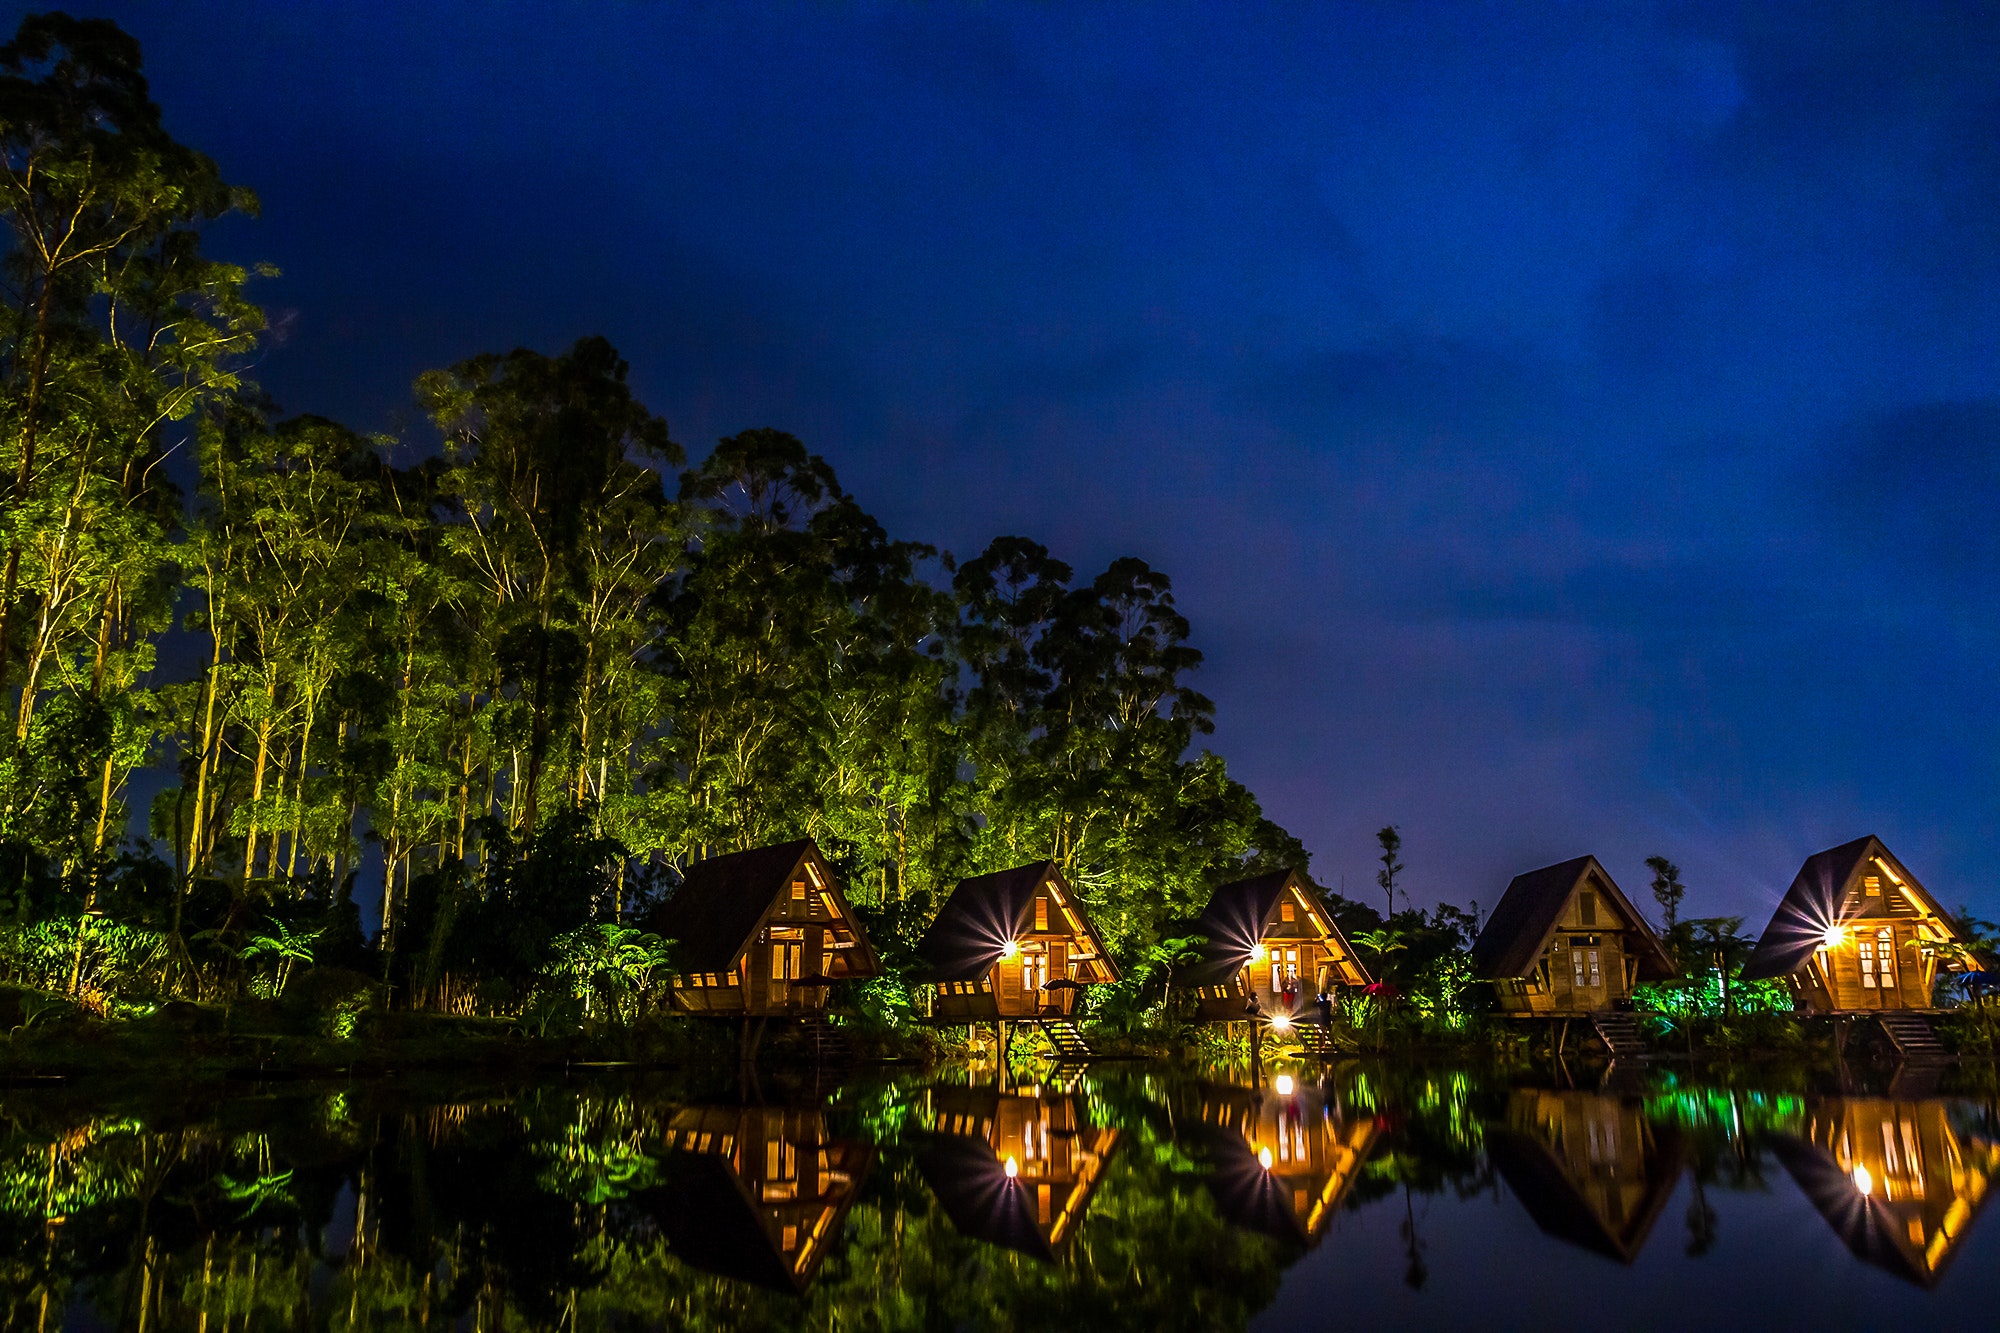 Brown wooden house near body of water during night time photo